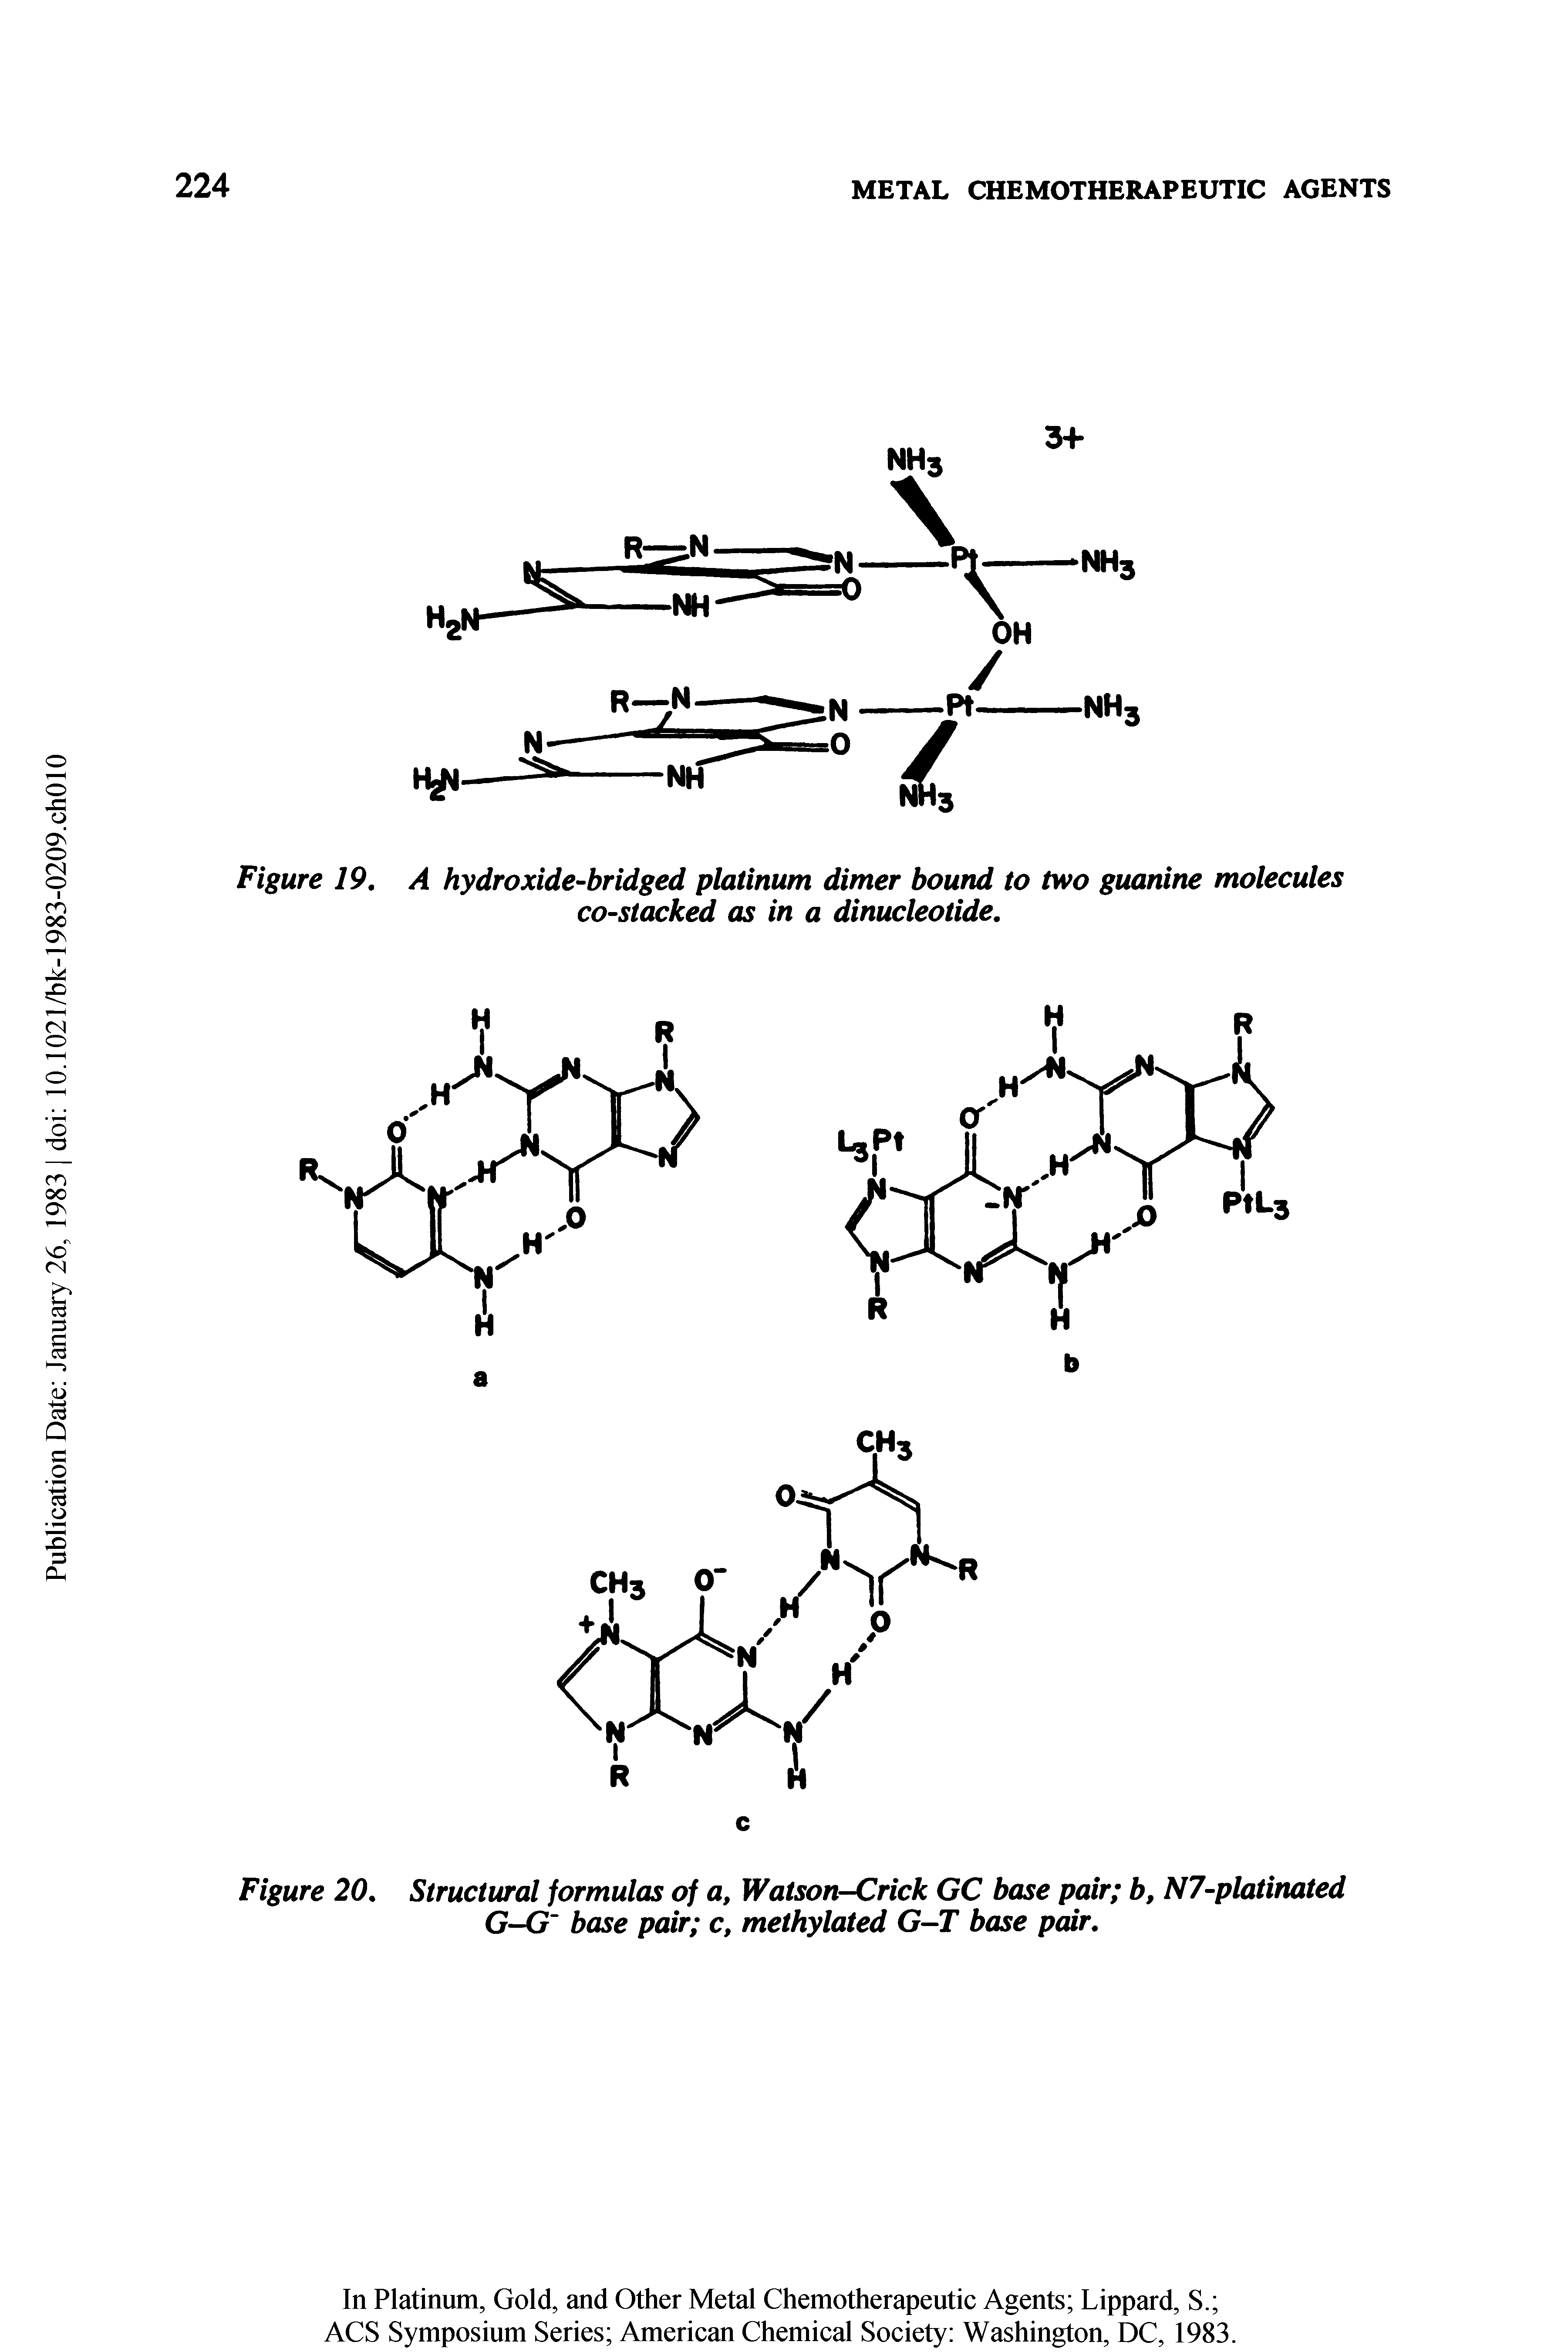 Figure 19, A hydroxide-bridged platinum dimer bound to two guanine molecules co-stacked as in a dinucleotide.